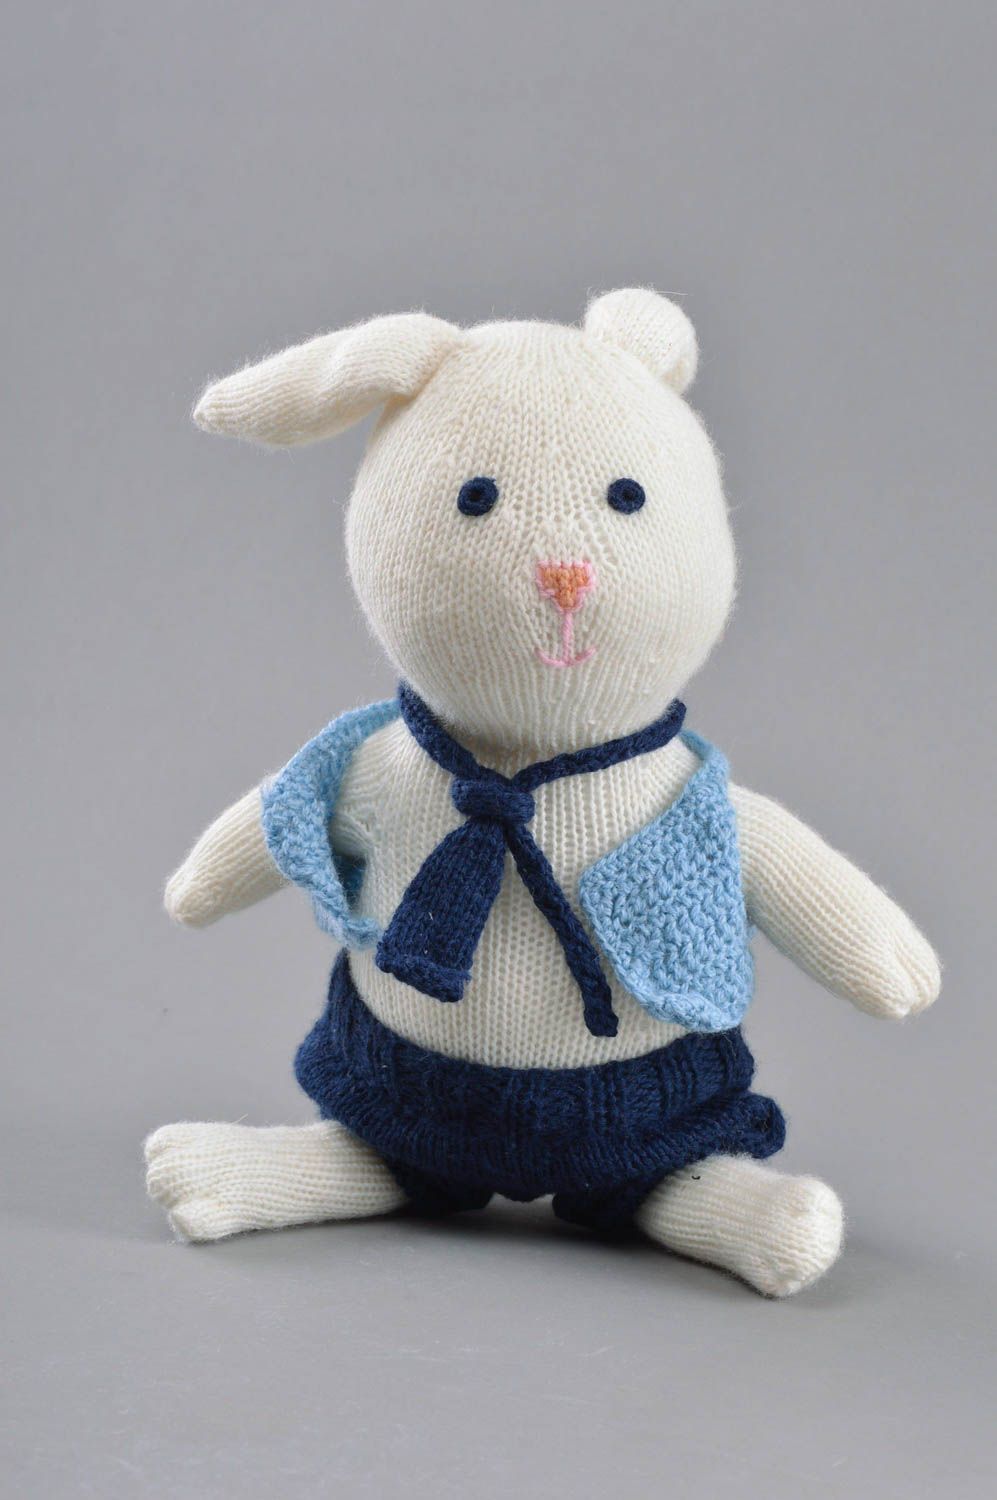 Handmade decorative crocheted toy white hare in shorts made of wool home decor photo 1